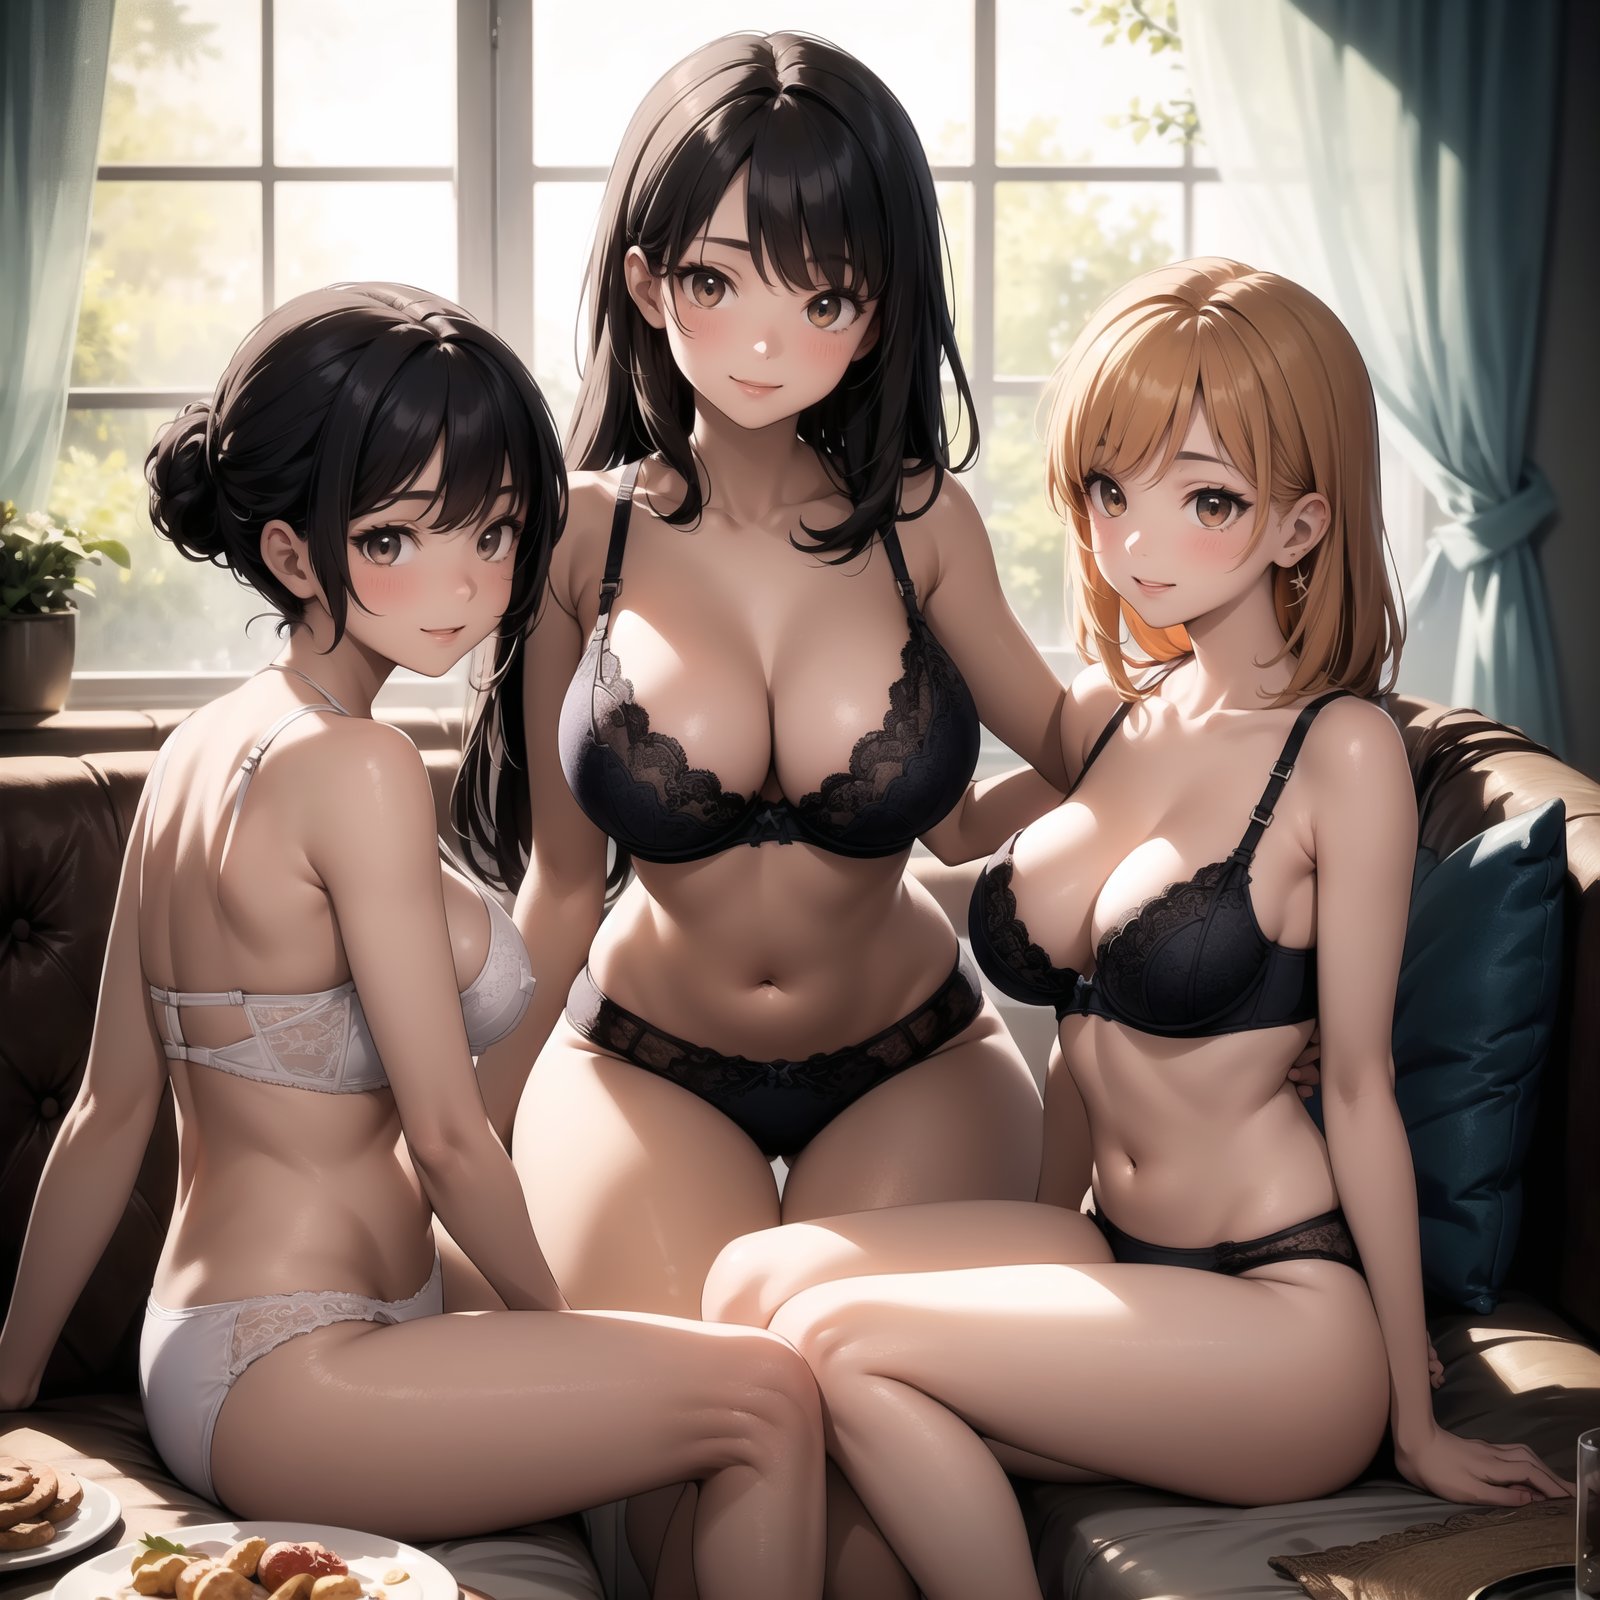 (masterpiece, best quality:1.4), Perfect delicate animation cel, female ageless, hazel eyes, protruding ears, deviated septum nose,round cheeks,auburn side-swept bangs hair, smile wearing triangle bra, plunge bra,huge breasts, sitting pose with legs spread, sitting with legs slightly spread, showcasing confidence and allure, silhouettes, characters outlined against a bright background, evoking intimacy without explicit details, sisters gathering, with a beautifully set table and heartfelt conversations